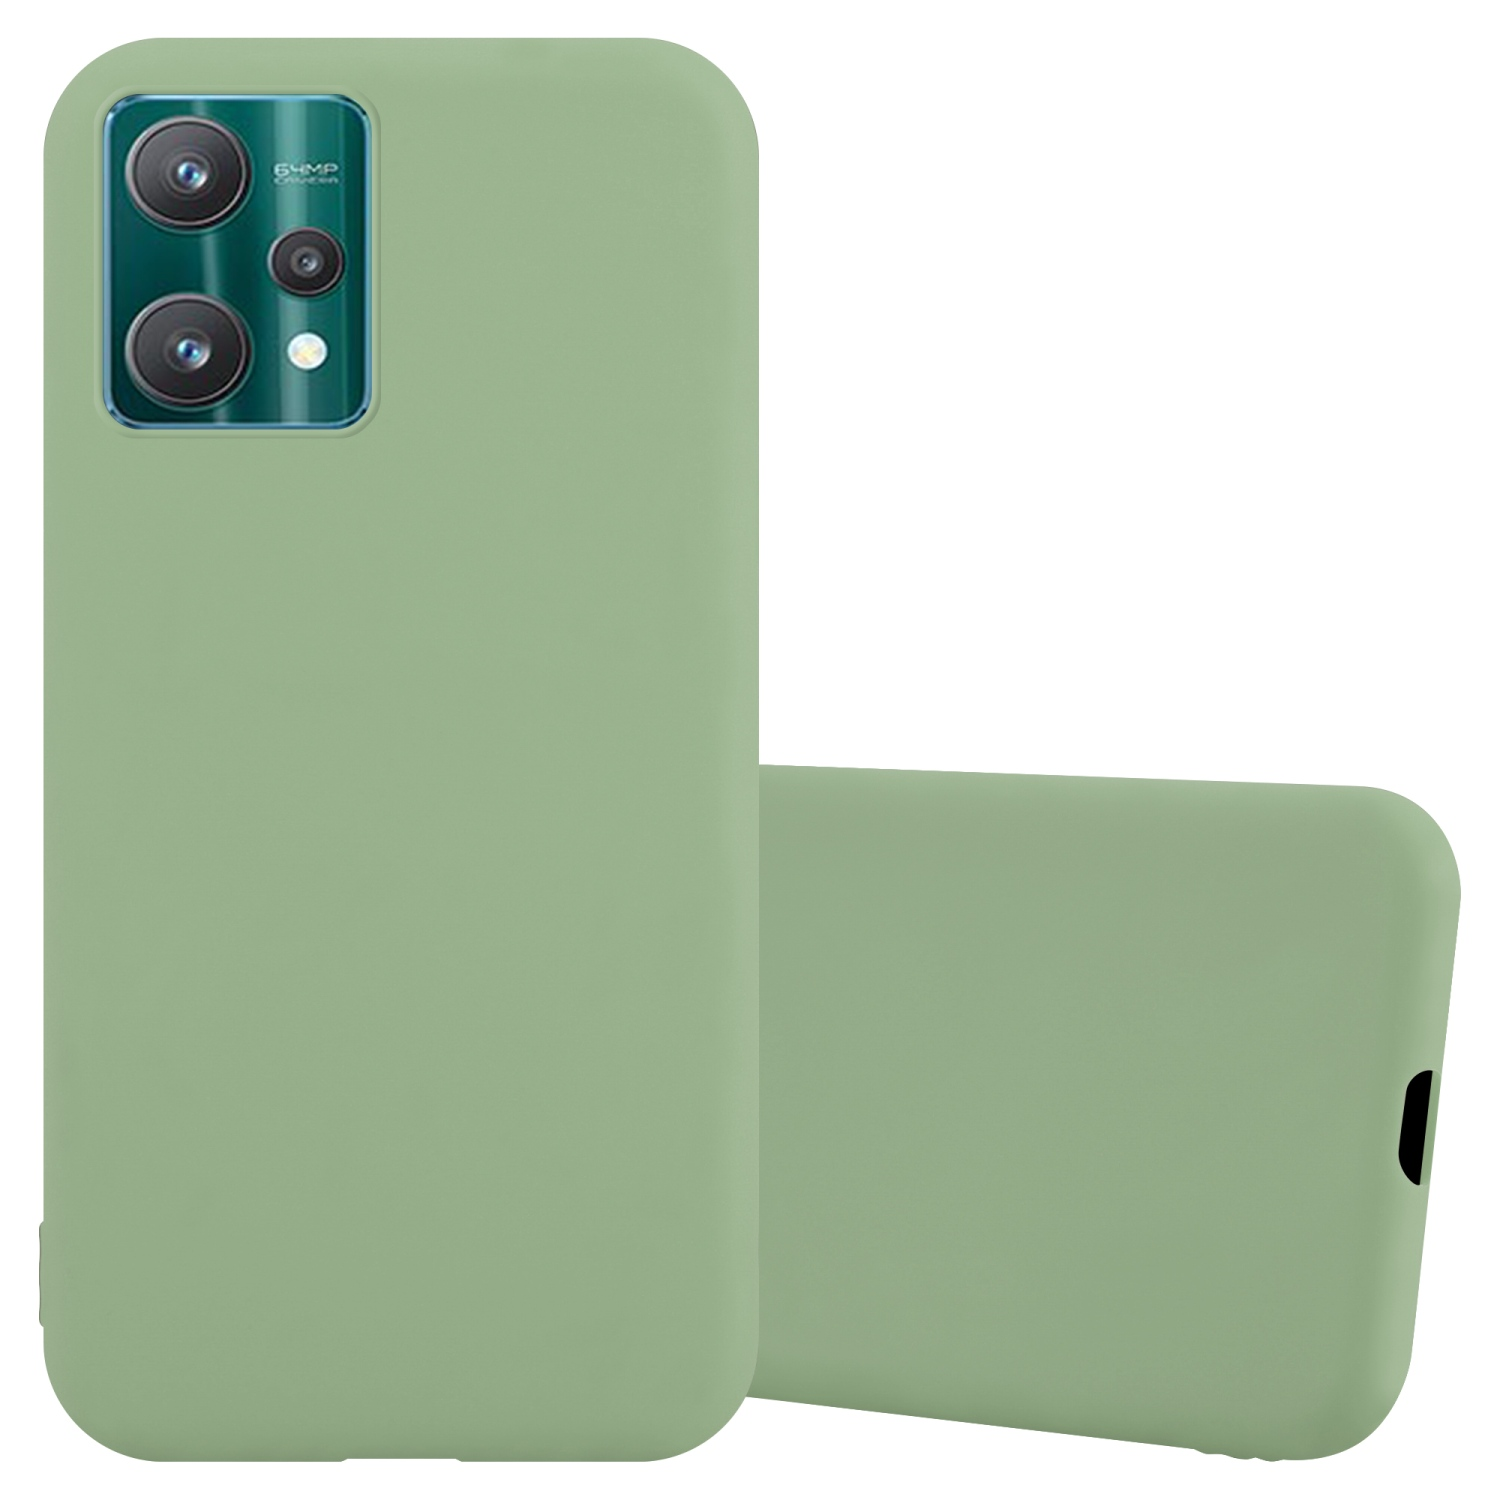 2 / GRÜN 5G / CANDY PASTELL LITE V25 Style, / Backcover, 9 CADORABO / TPU im OnePlus PRO Realme, Candy Nord Hülle CE 5G, Q5 9